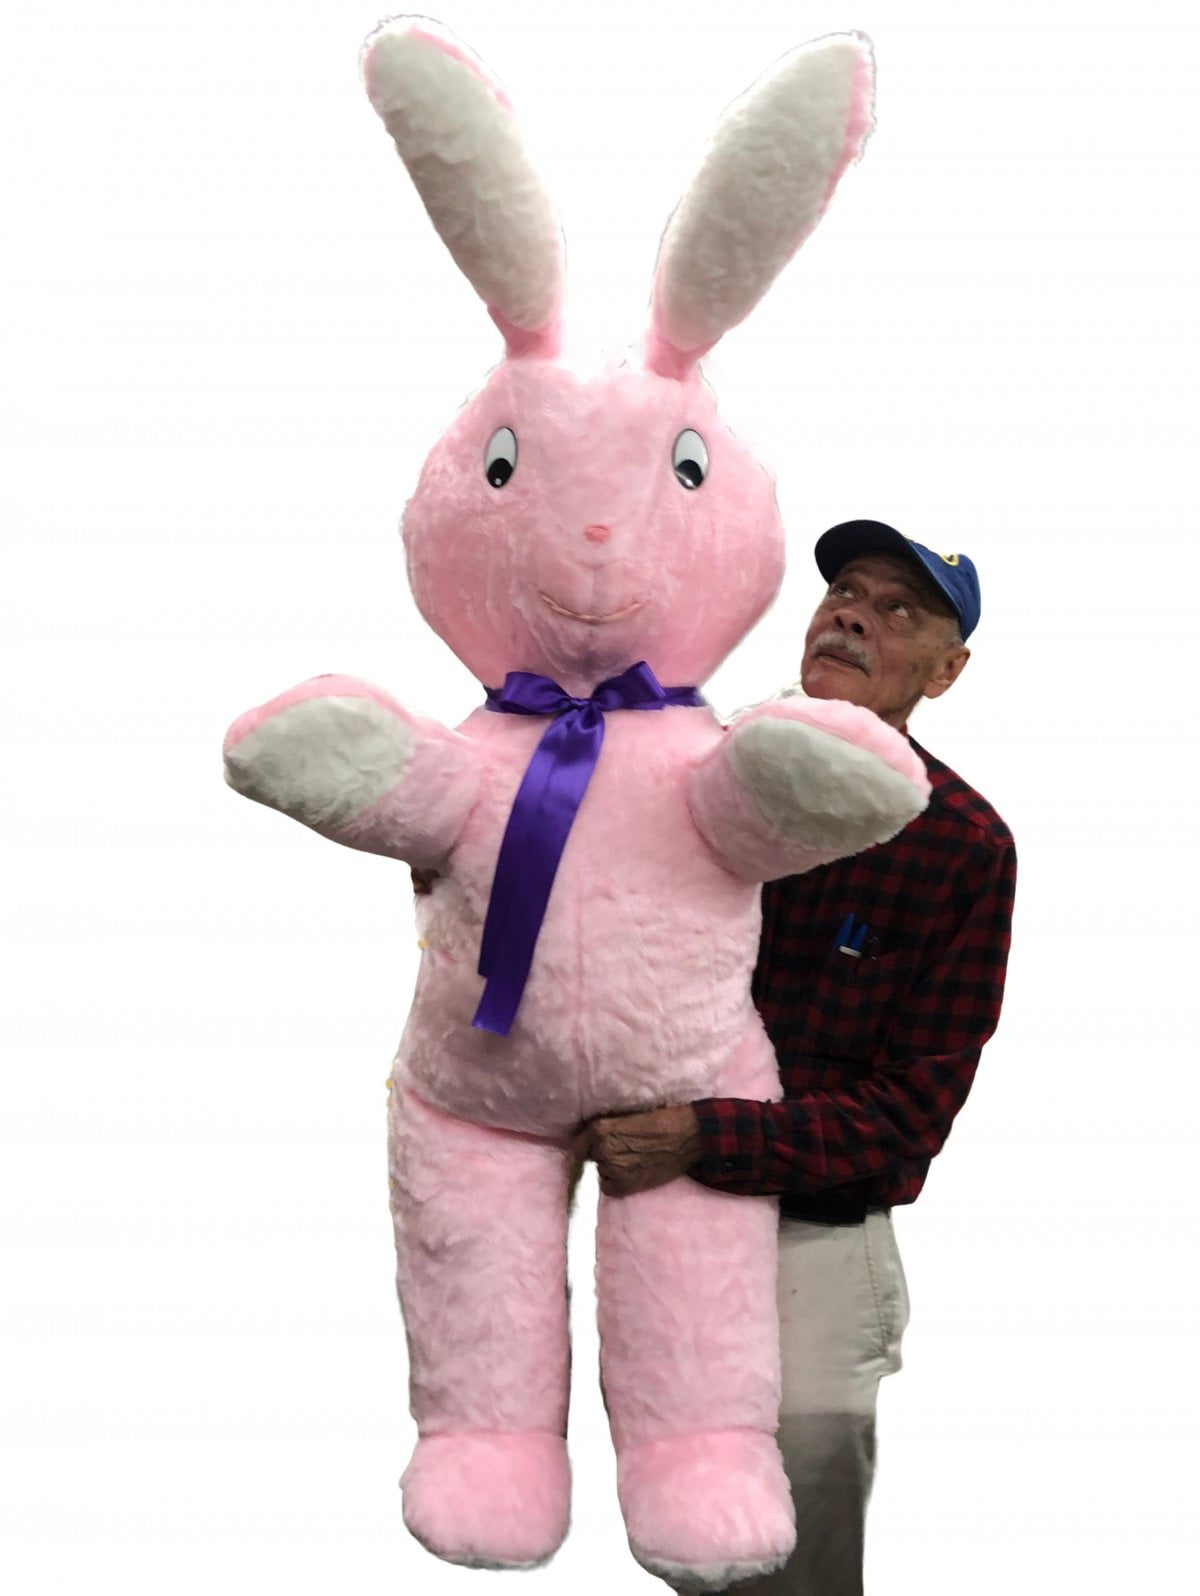 Giant Soft Plush Bunny Pillow Toys Big Stuffed Animals Pink Rabbit Doll for Kid 